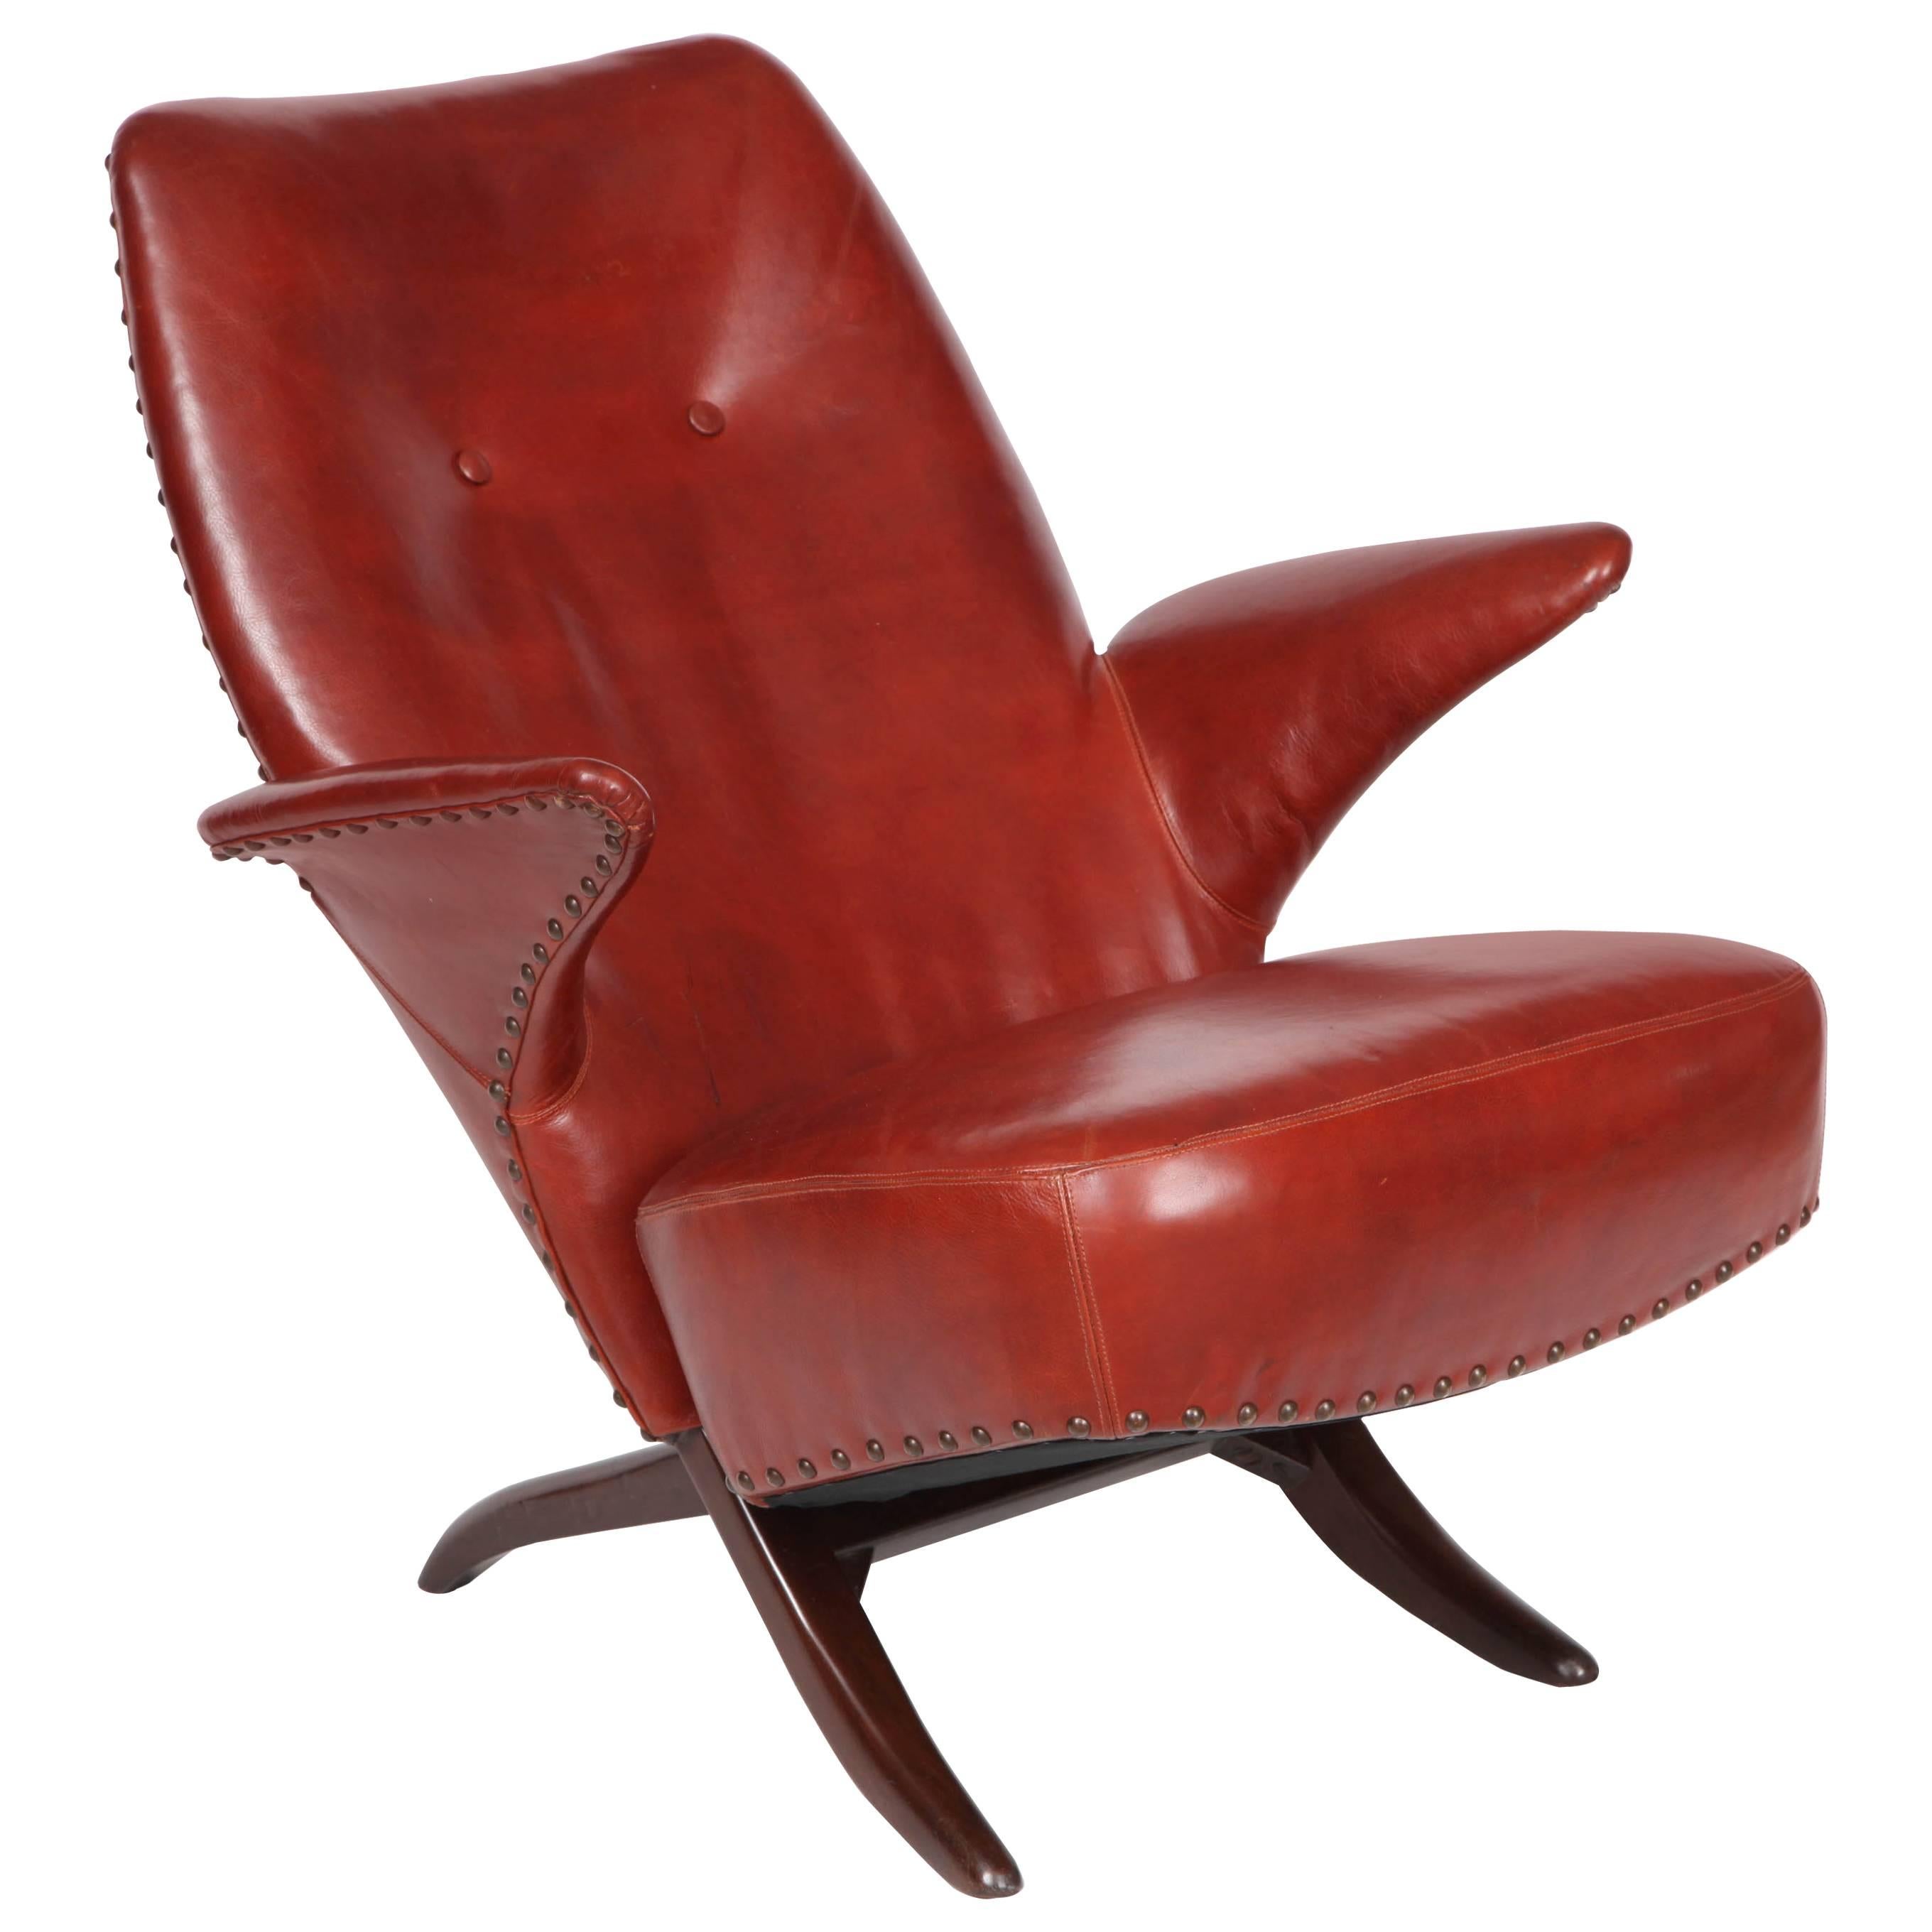 "Penguin" Chair in Original Leather Upholstery by Theo Ruth for Artifort